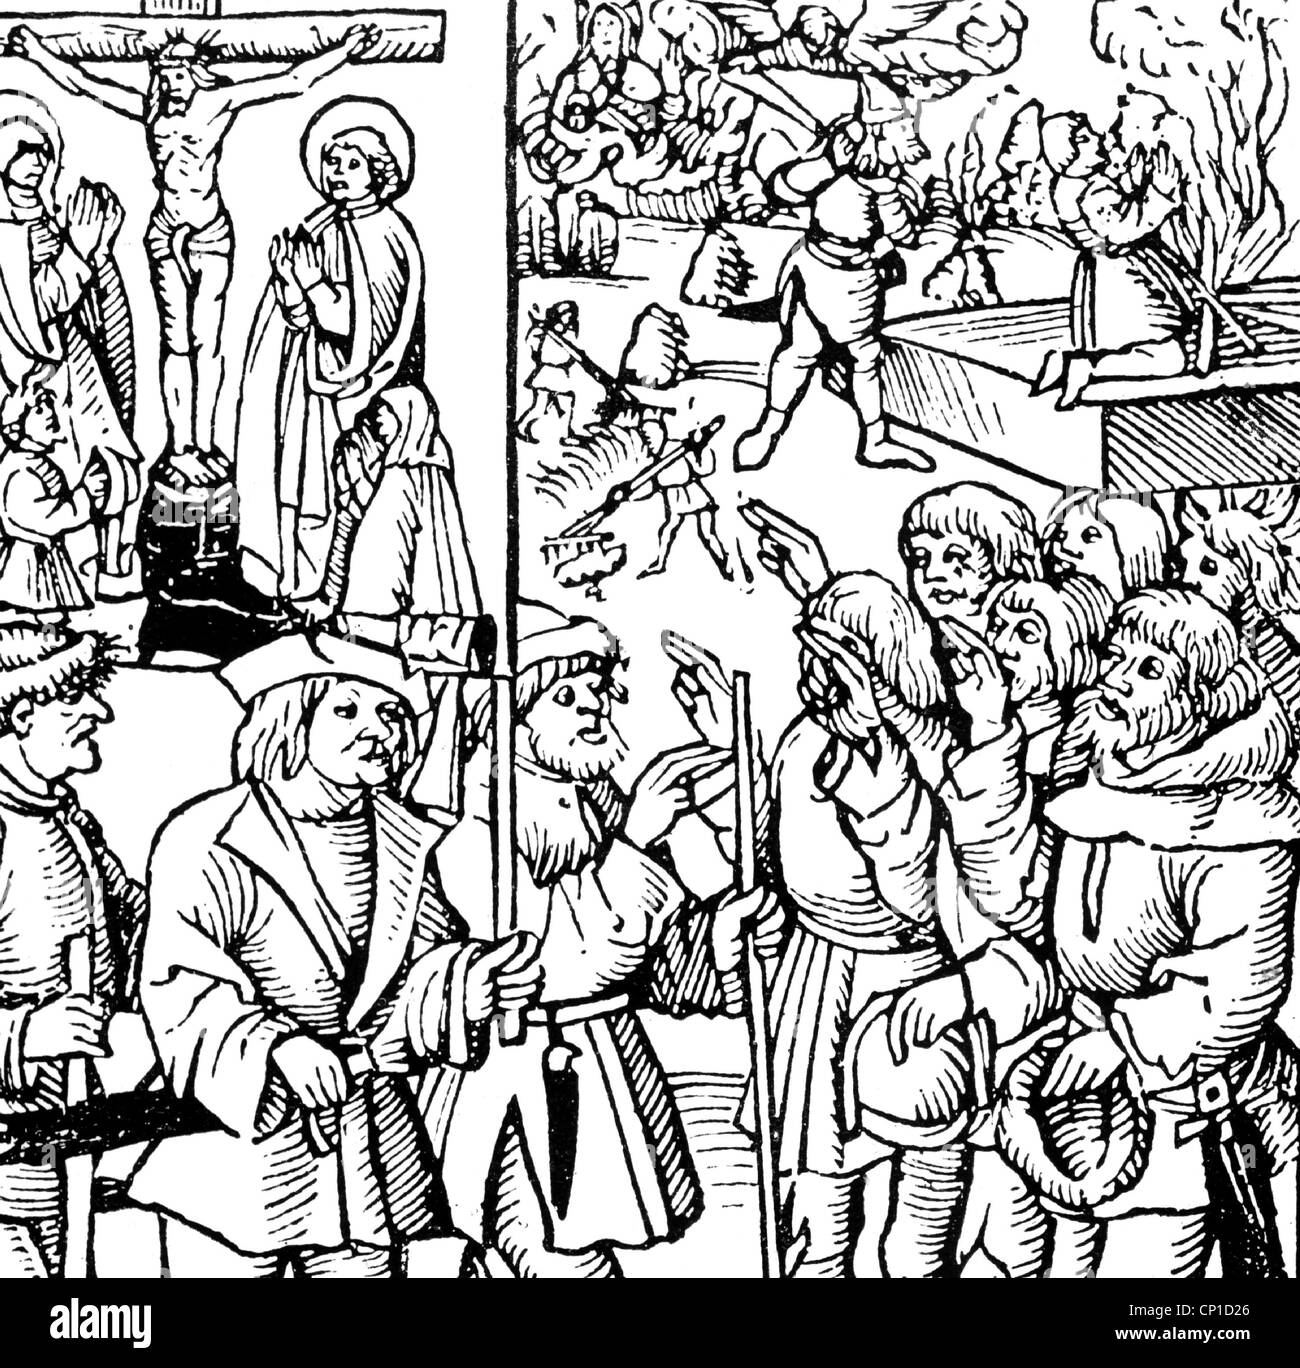 events, Bundschuh movement 1493 - 1517, peasants swearing on the Bundschuh flag, woodcut, 1513, uprising, tied shoe, farmers, revolt, Peasants' War, Middle Ages, Germany, Swabia, conspiracy, alliance, Jesus Christ, crucifix, oath, oath of allegiance, rebels, insurgents, 16th century, historic, historical, medieval, people, Additional-Rights-Clearences-Not Available Stock Photo